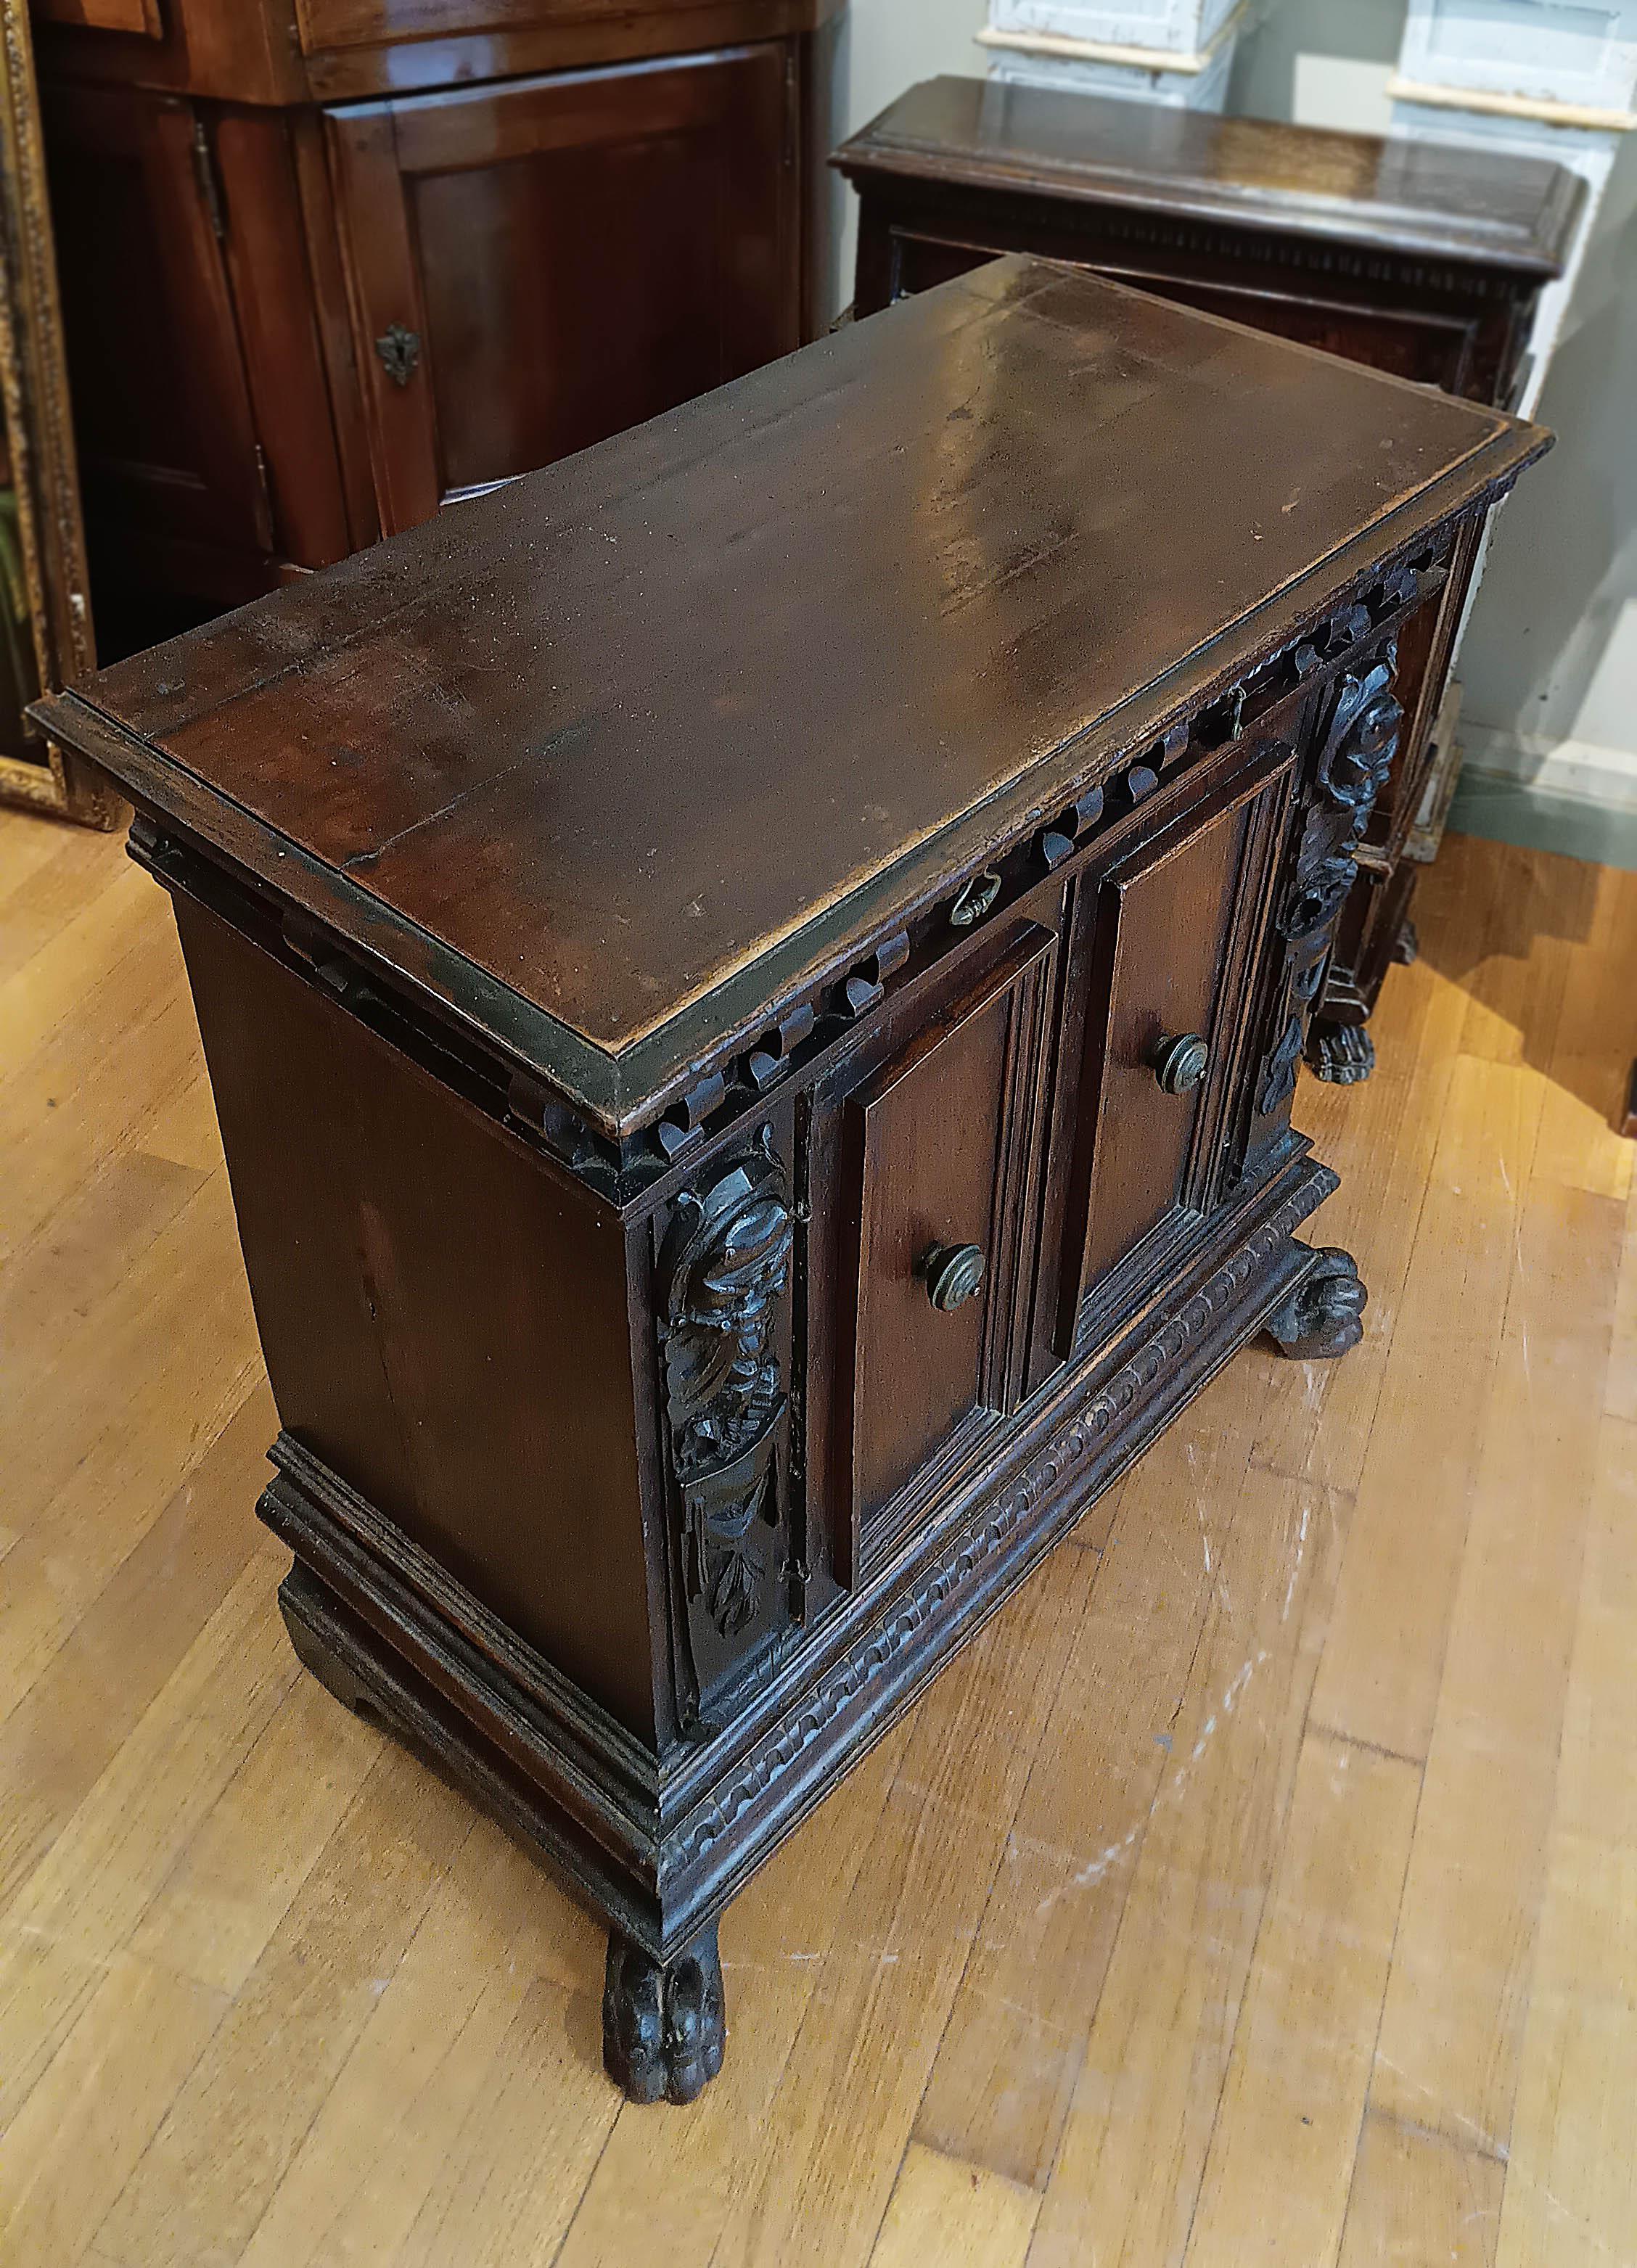 Renaissance 16th CENTURY RENAISSANCE SMALL SIDEBOARD IN SOLID WALNUT For Sale